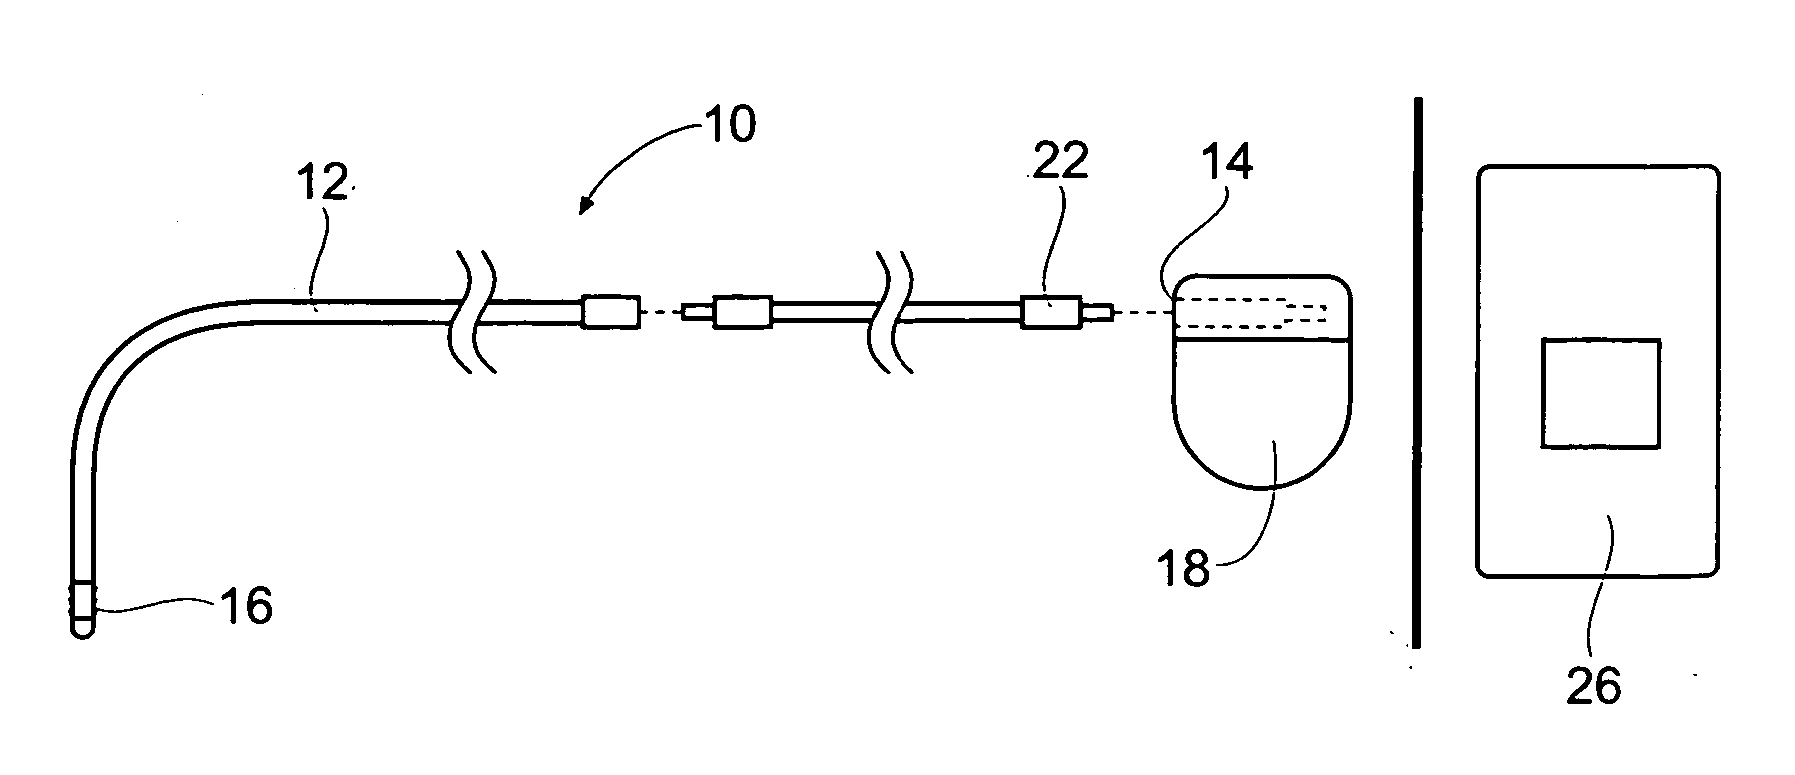 Lead and electrode structures sized and configured for implantation in adipose tissue and associated methods of implantation